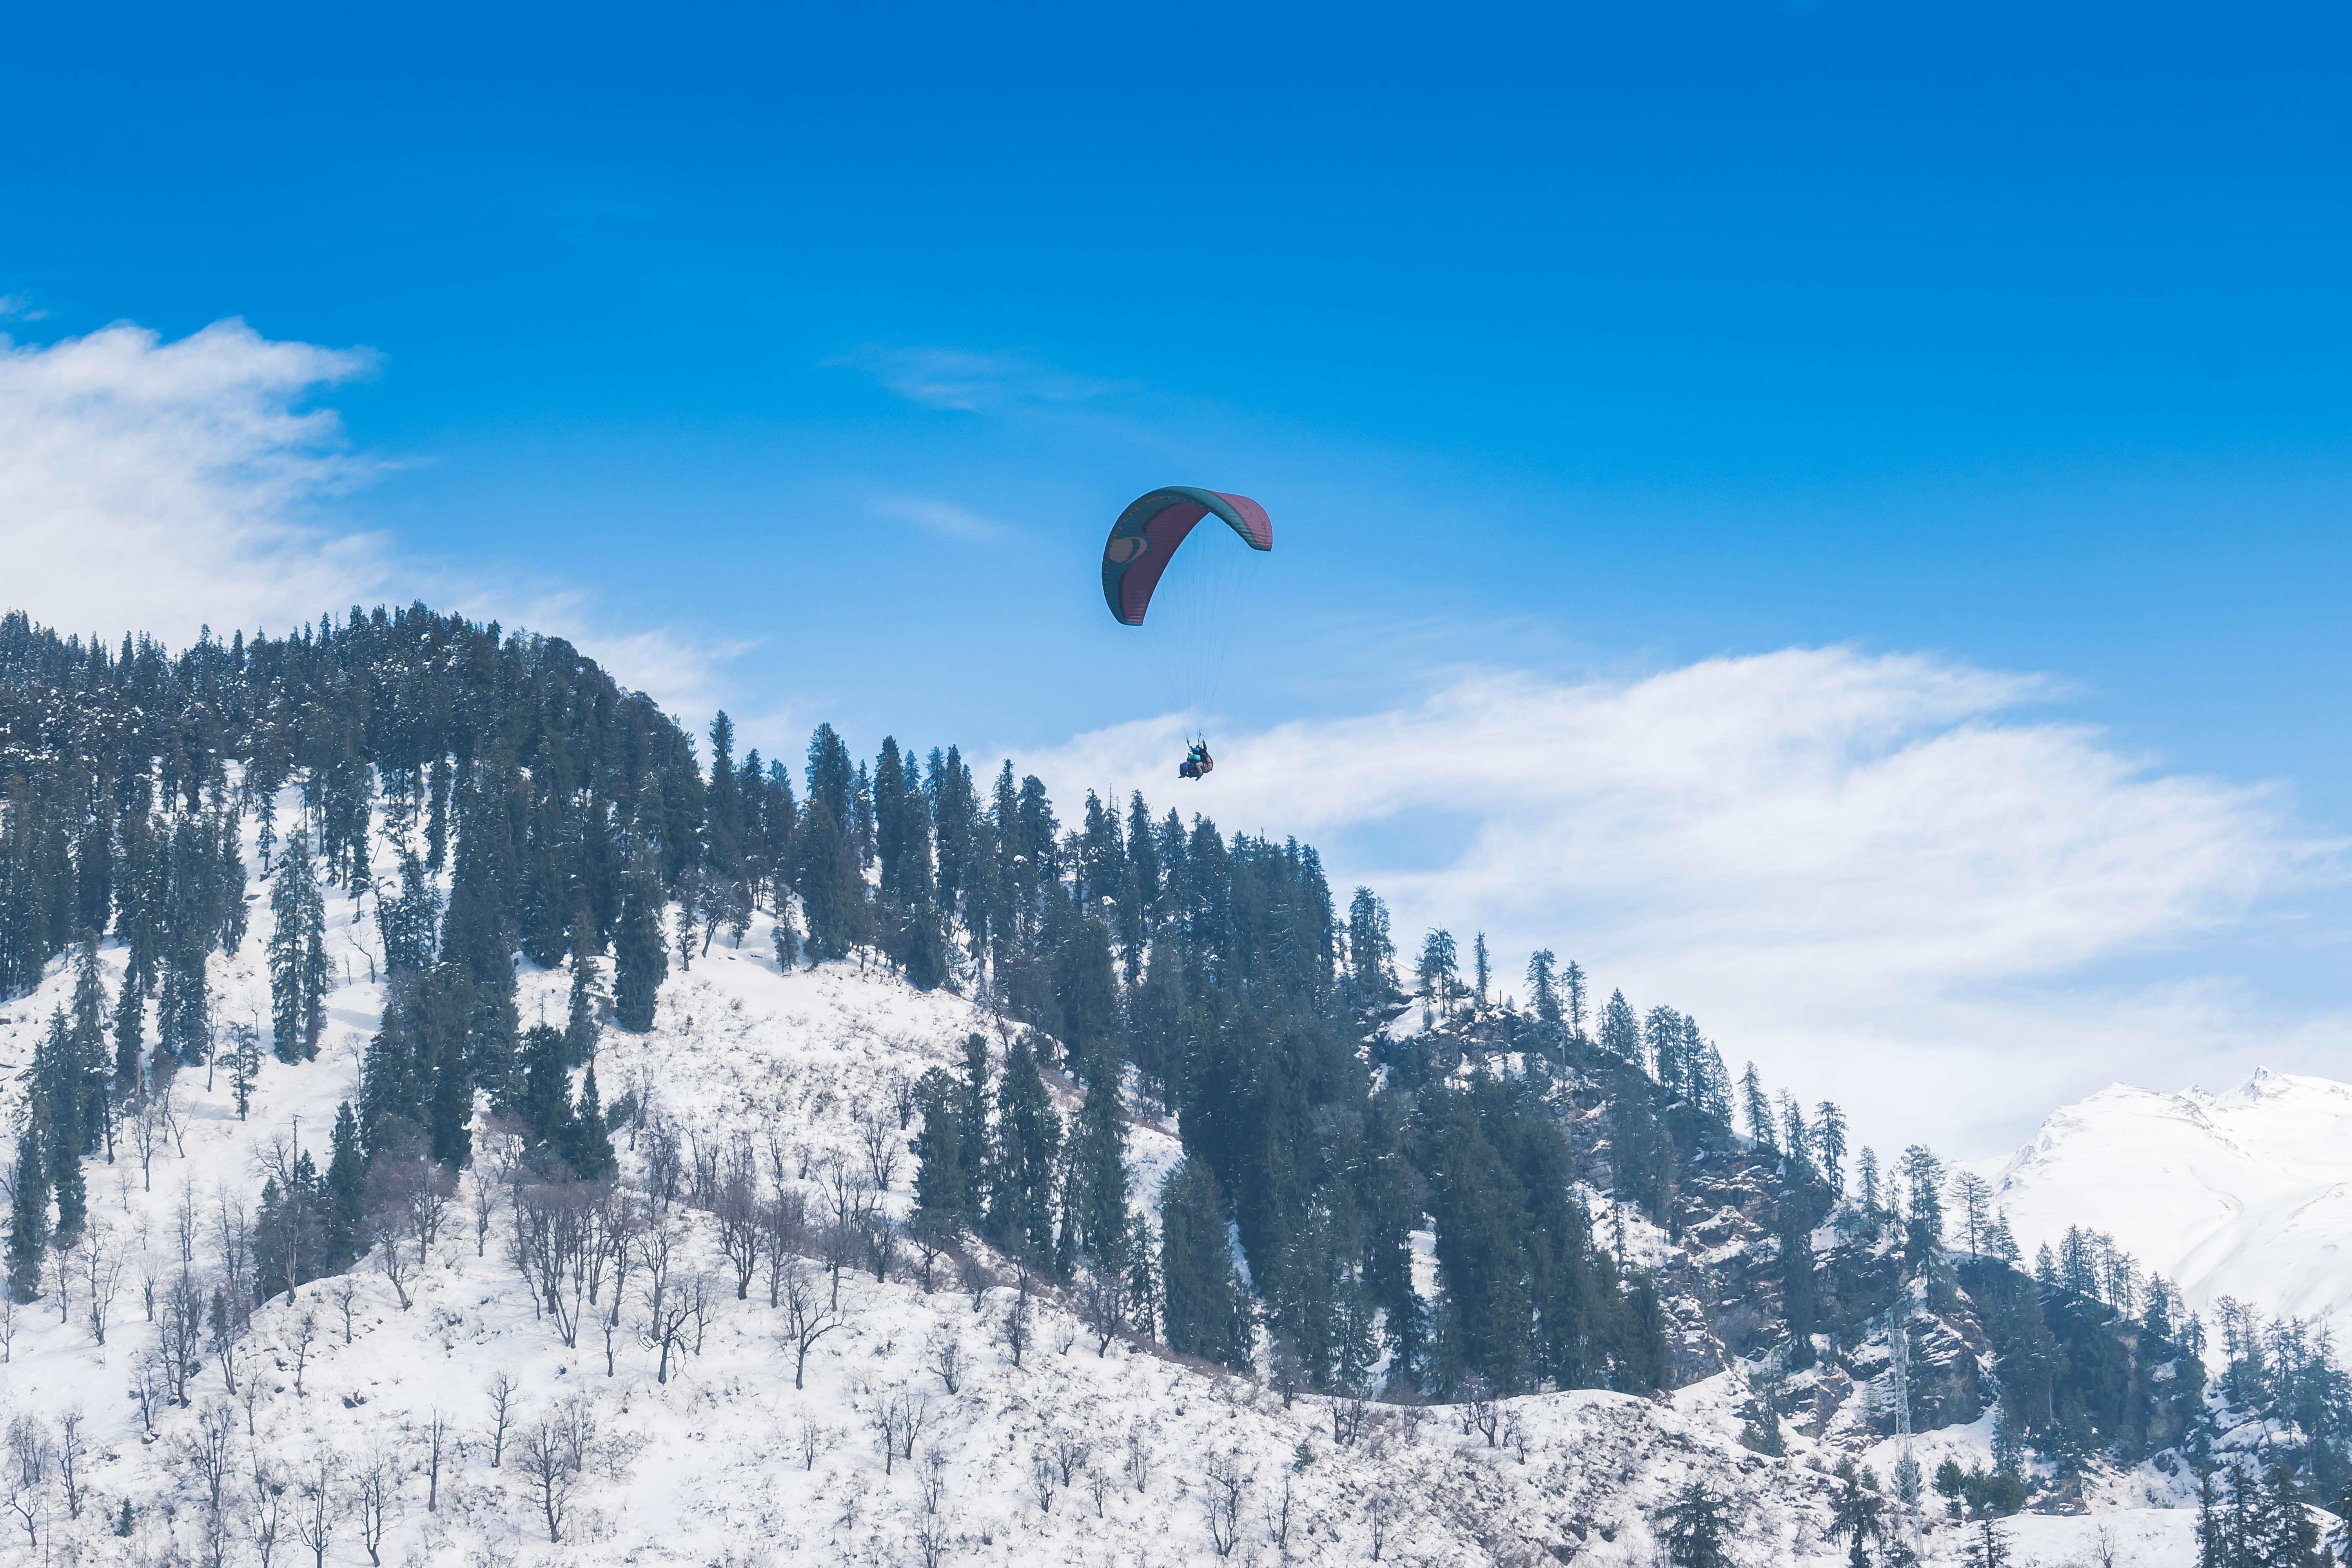 Manali Packages from Kerala | Get Upto 50% Off